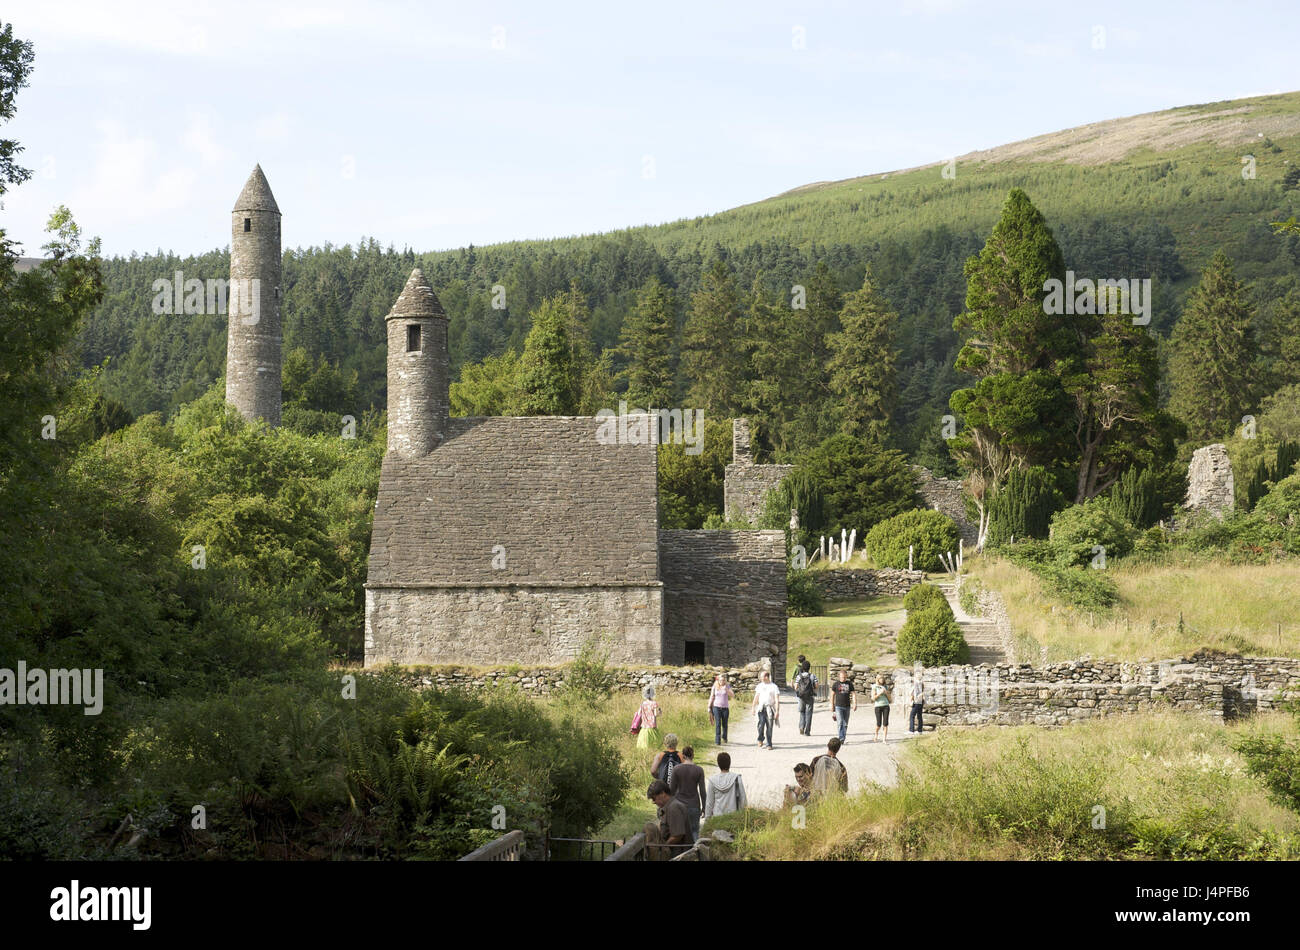 Ireland, Leinster, county Wicklow, Glendalough, cloister attachment, round tower, Stock Photo